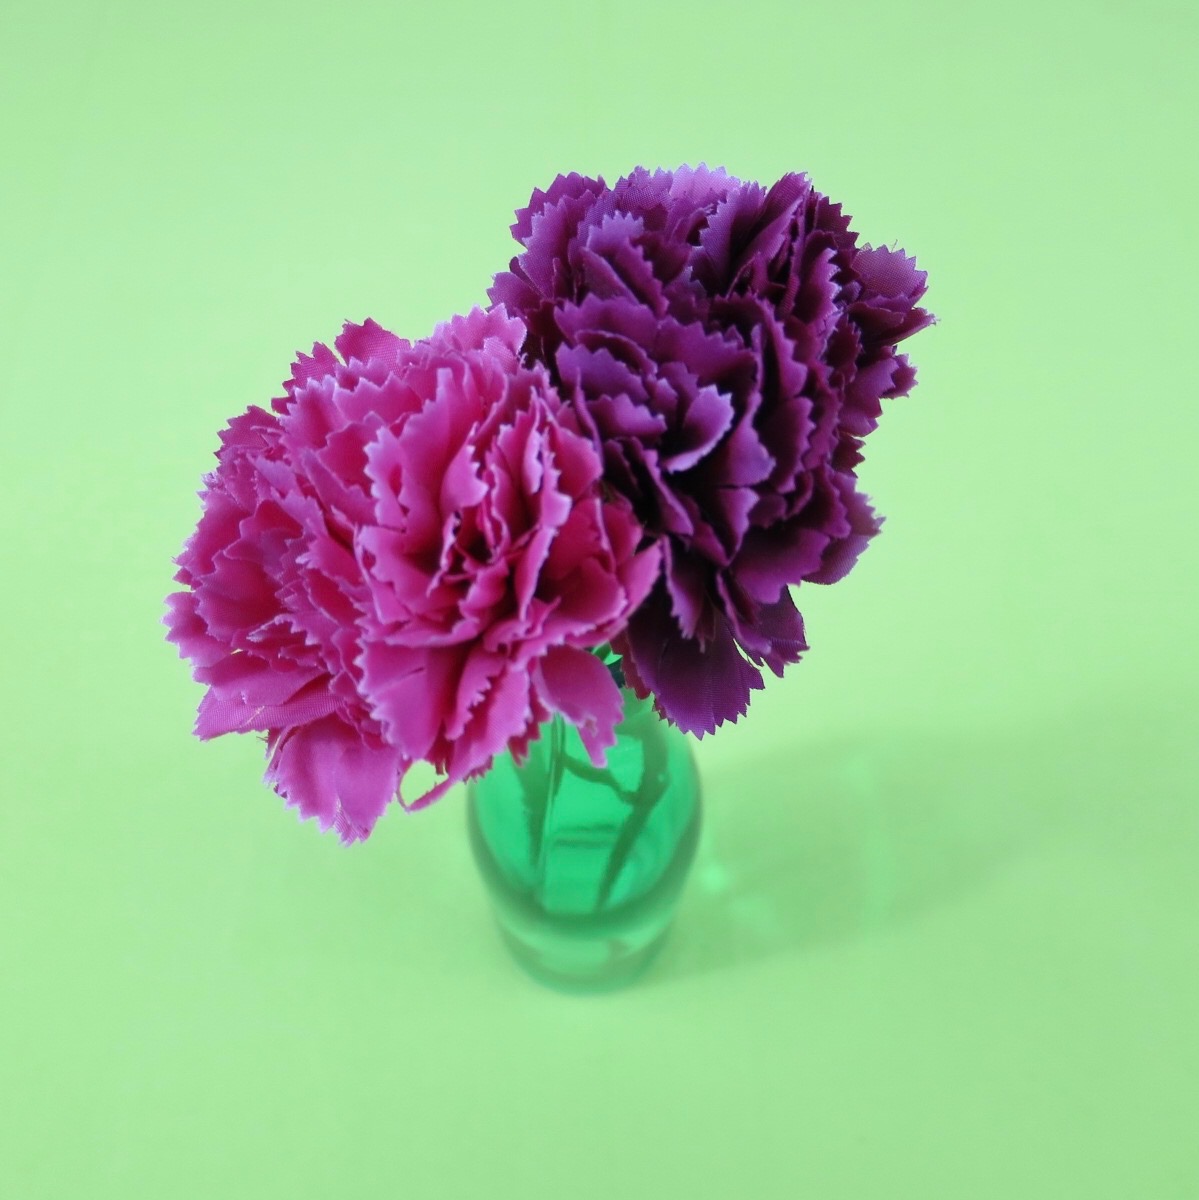 Pink and purple flowers in green vase